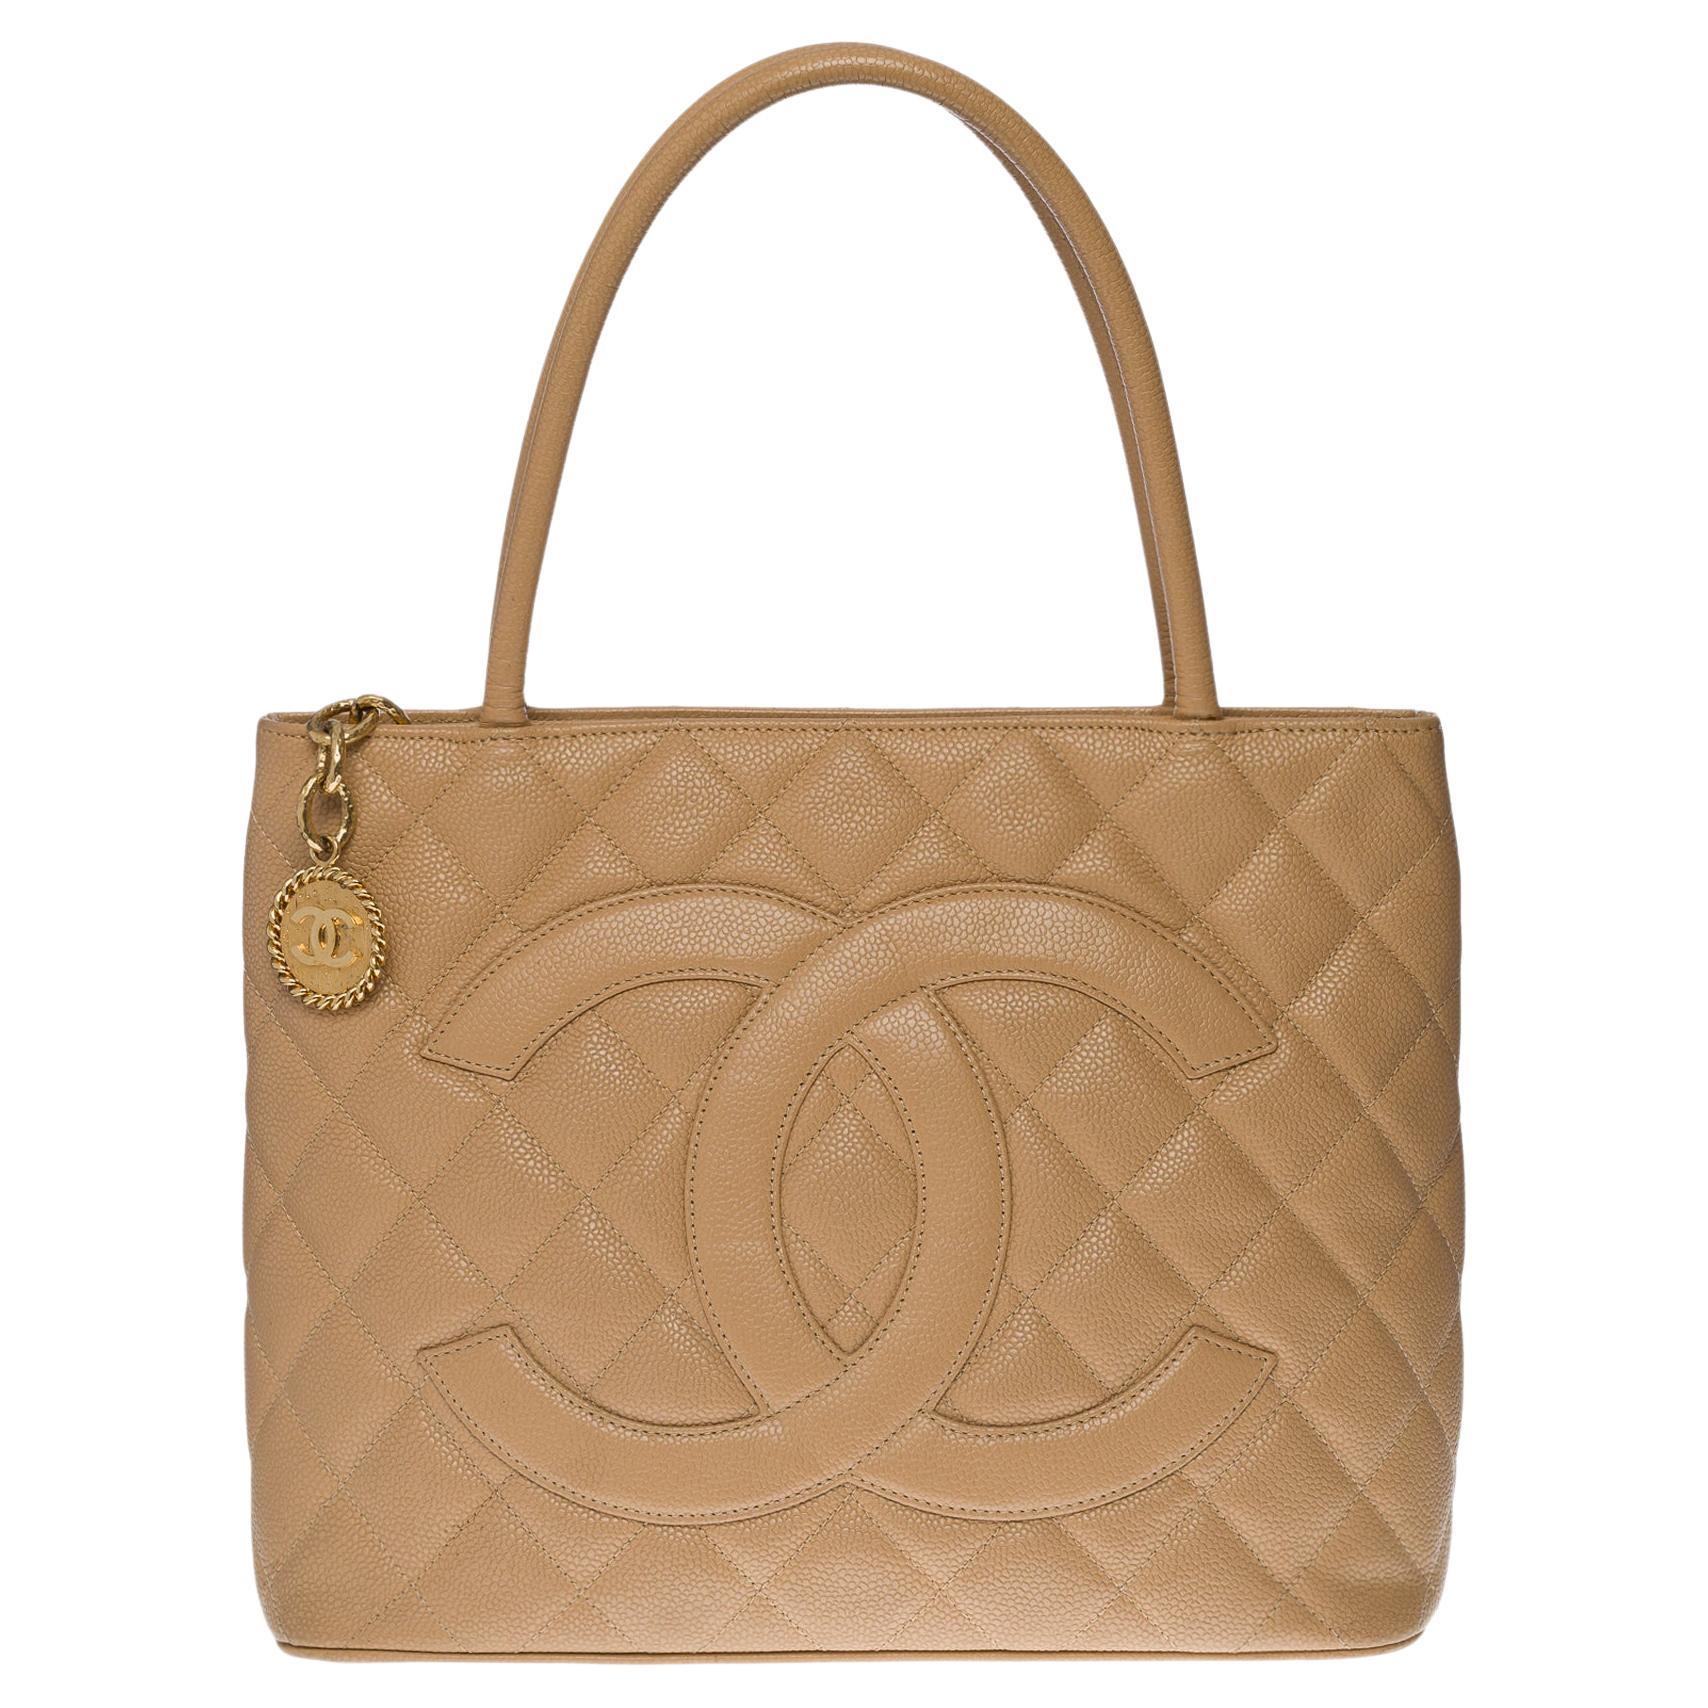  Chanel Médaillon Tote bag in beige caviar leather, GHW